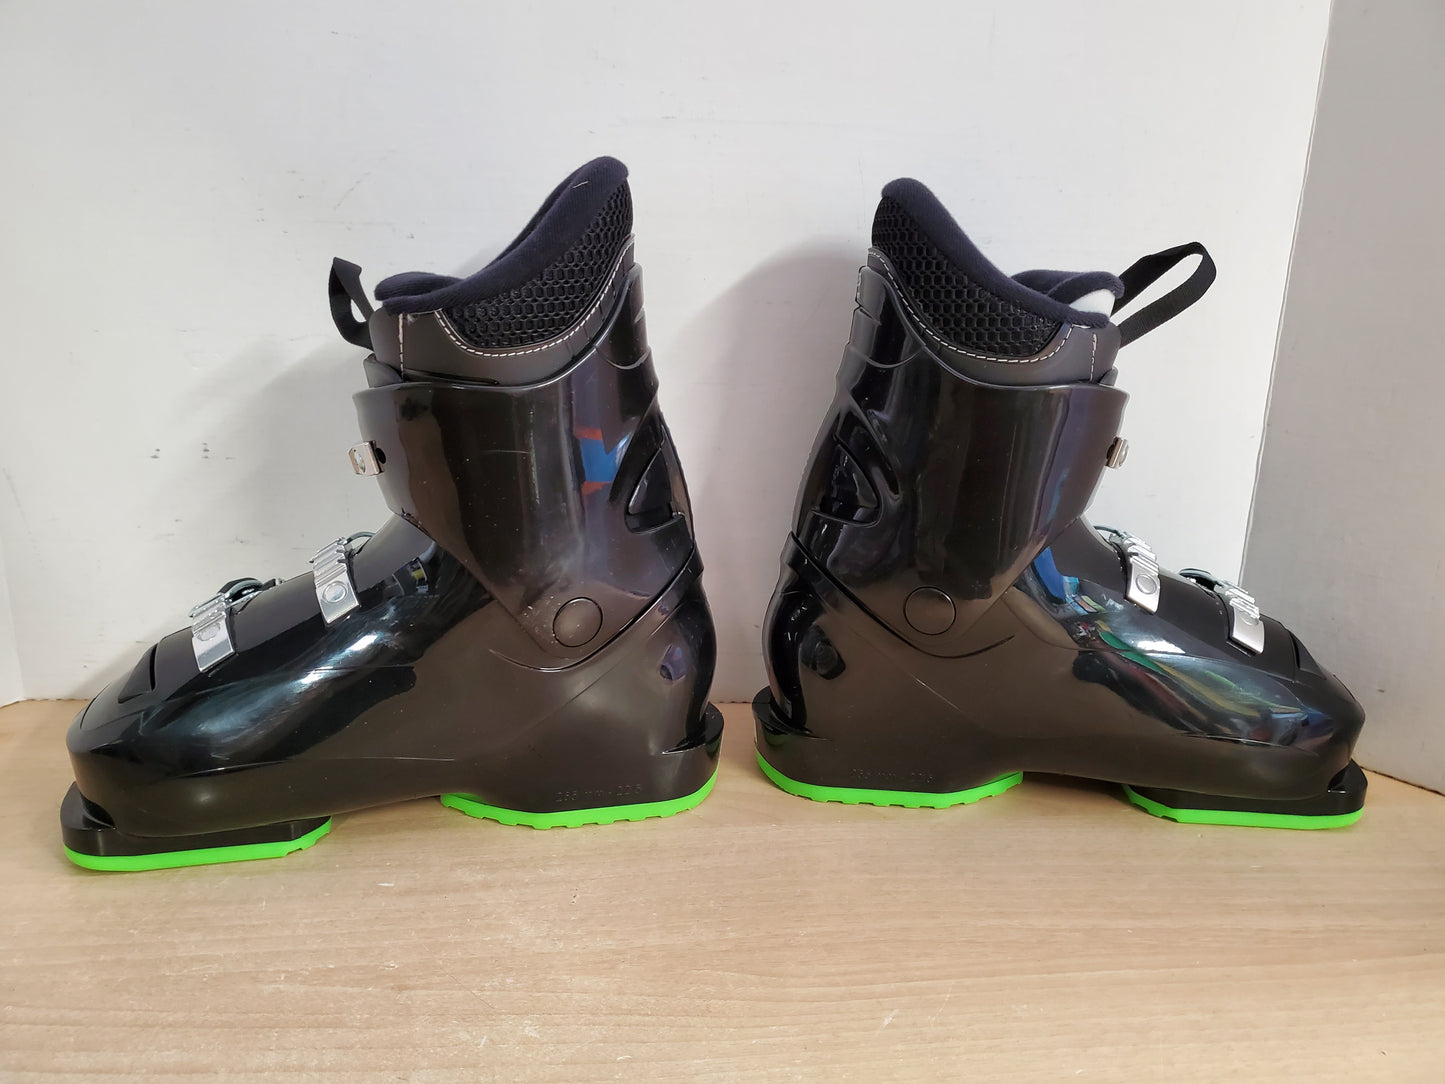 Ski Boots Mondo Size 22.5 Child Shoe Size 4 Mondo 265 mm Rossignol Black Lime New With Tags